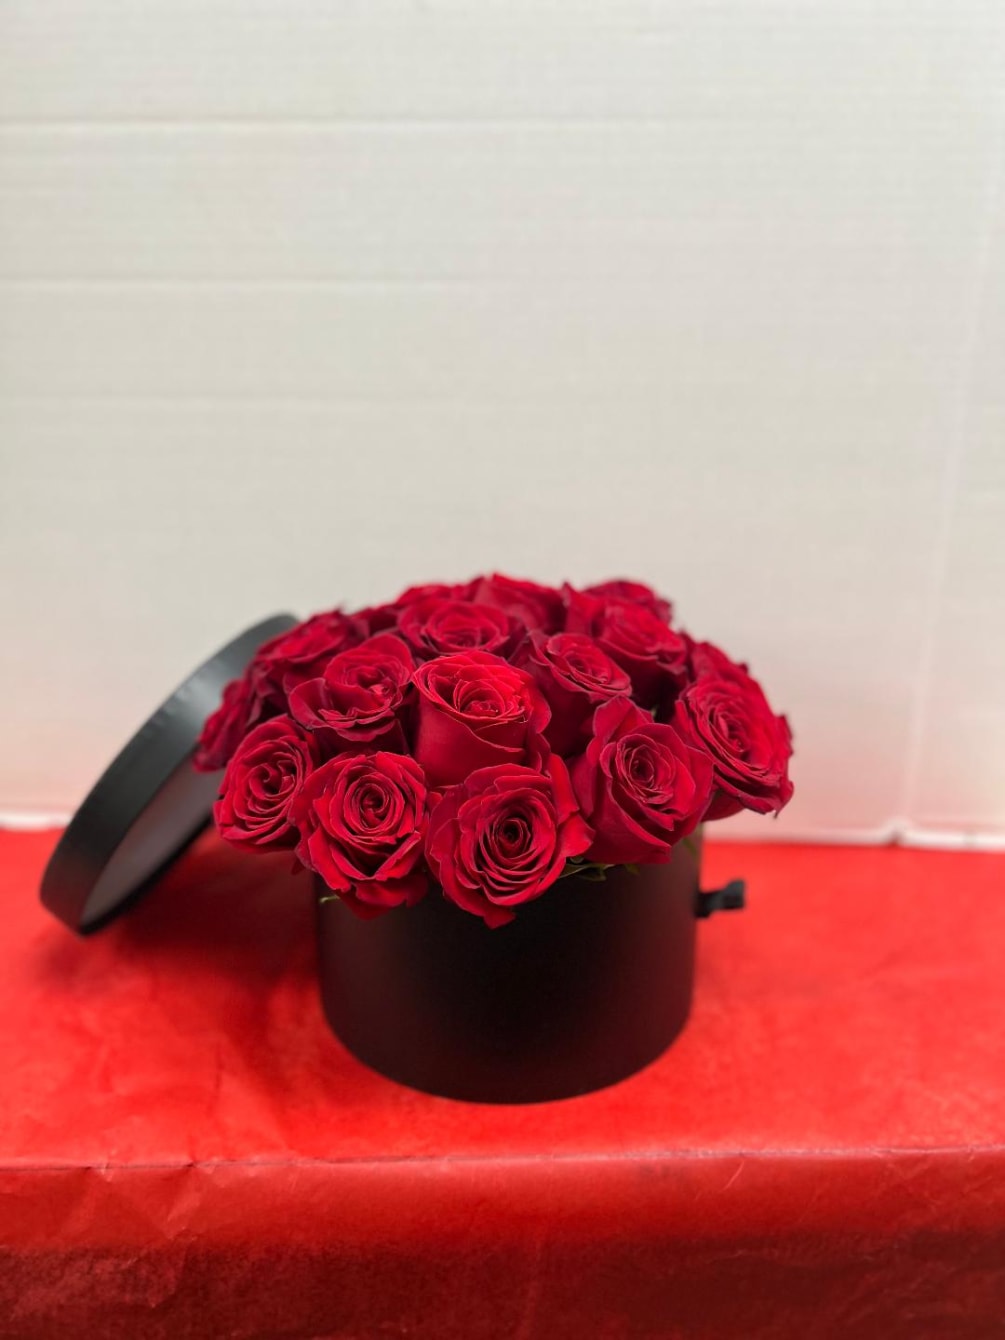 Check out this new modern popular look for rose arrangements! A large